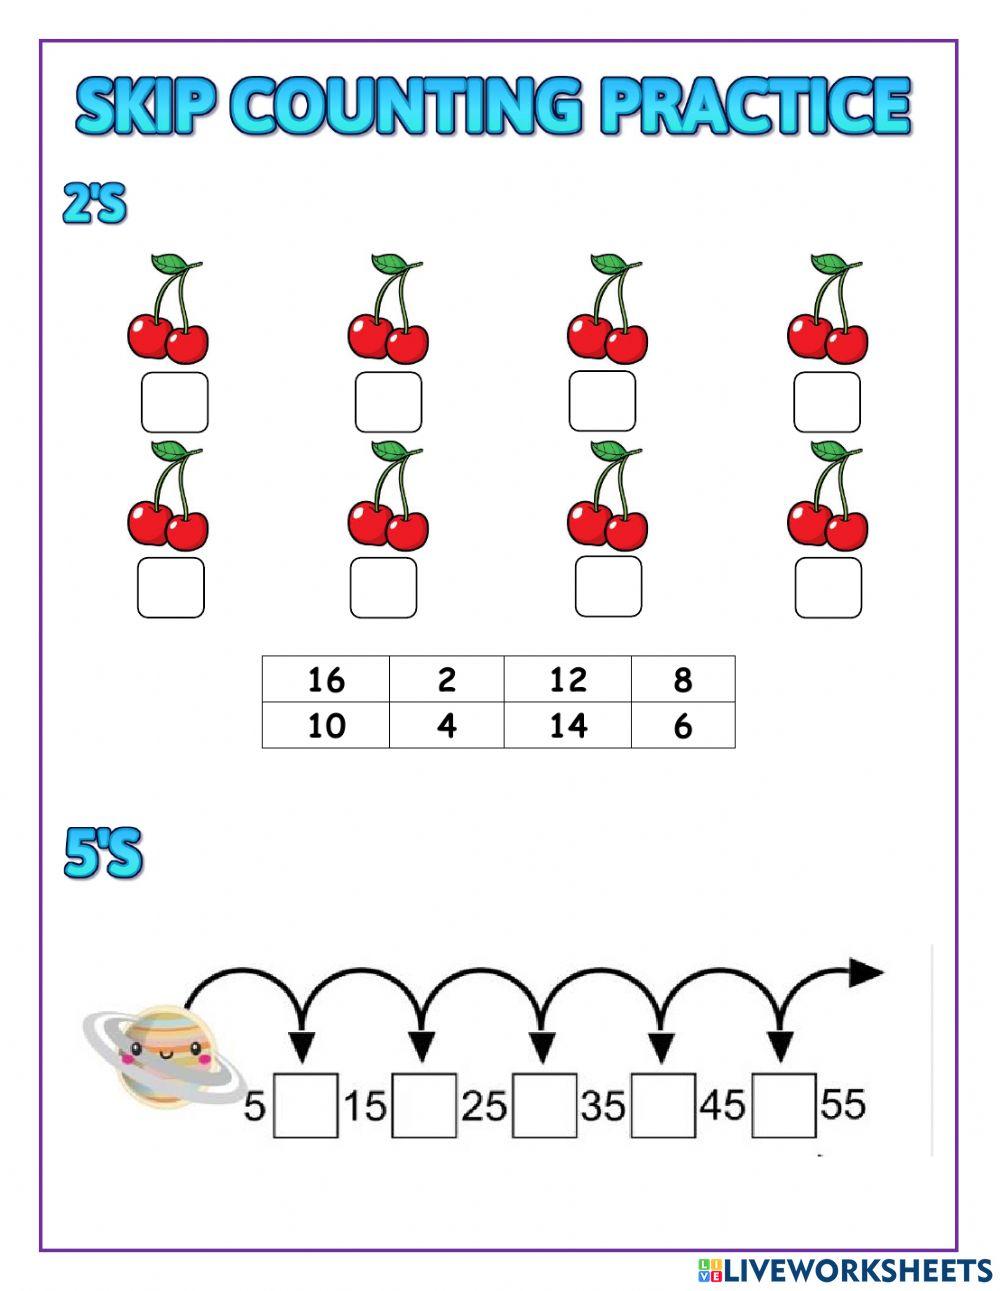 Skip counting by 2's, 5's and 10's